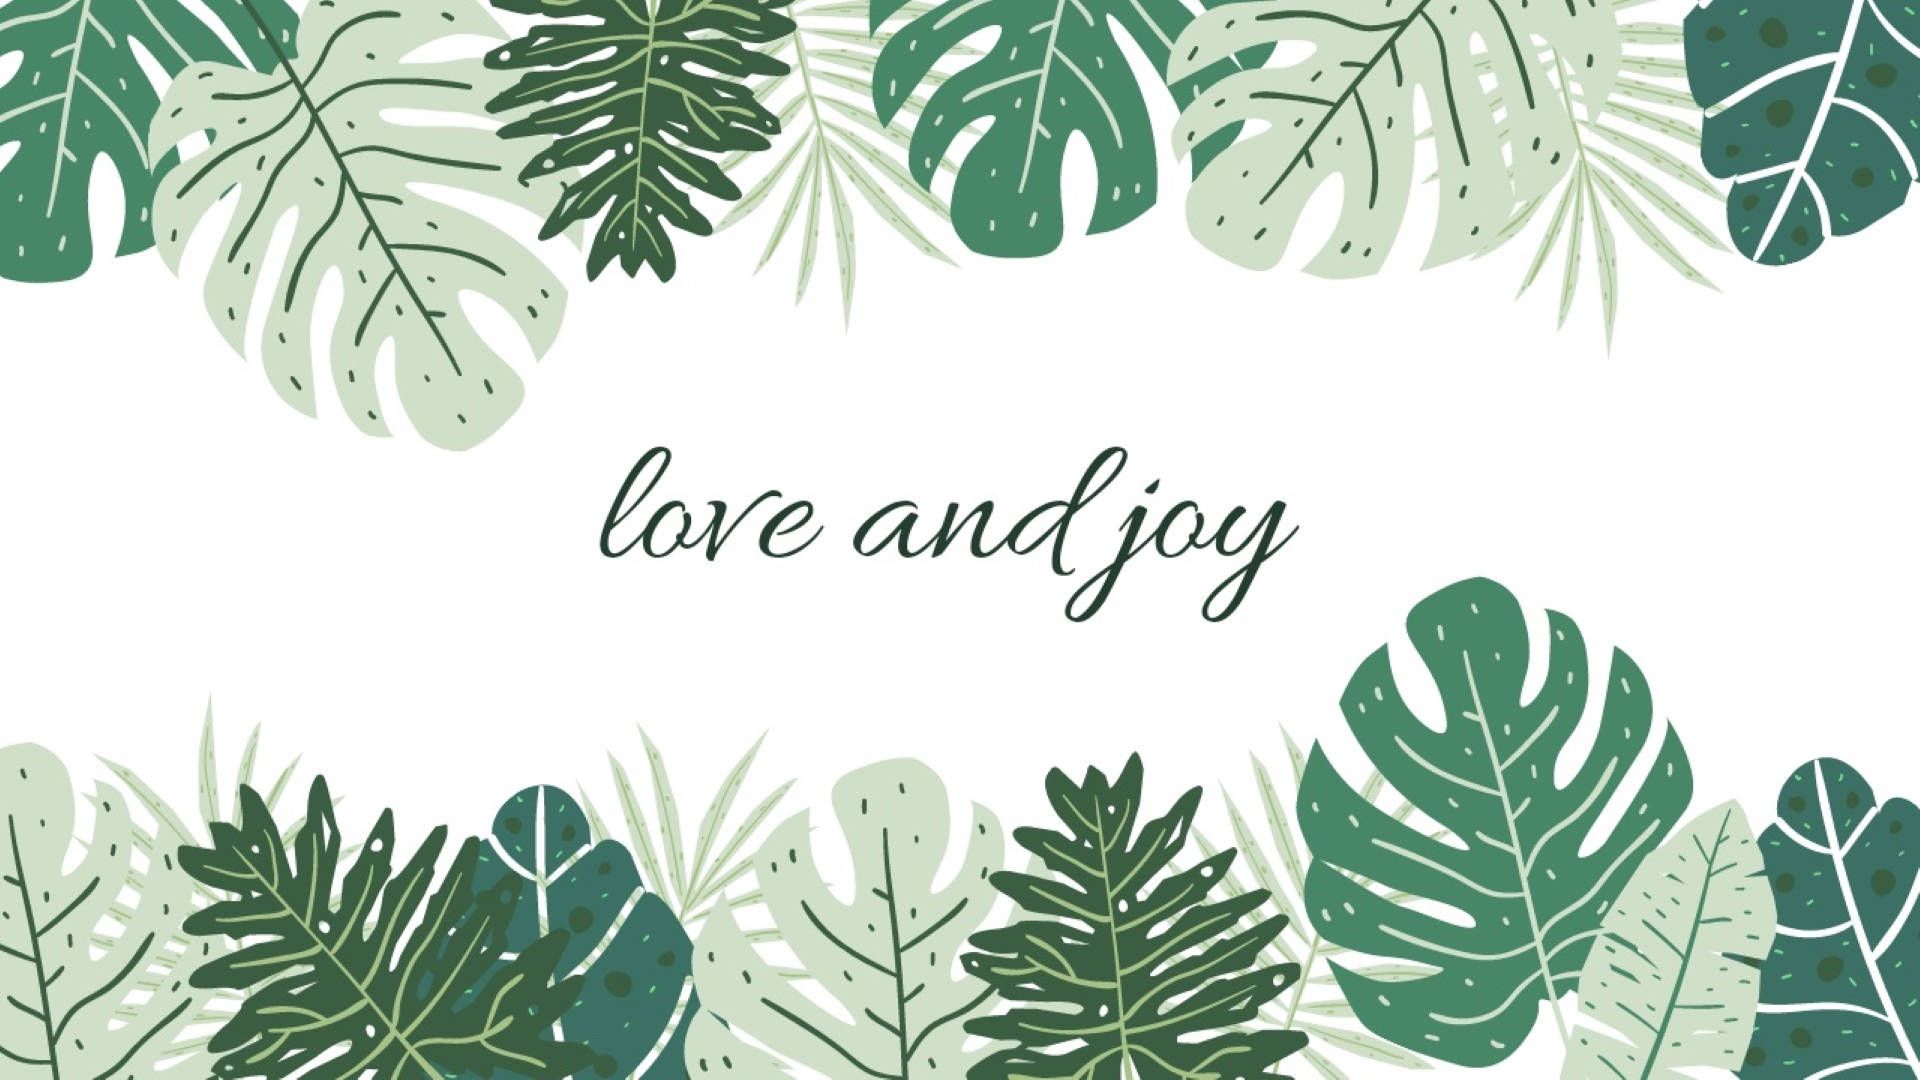 A white background with a border of green tropical leaves and the words love and joy in the center - Monstera